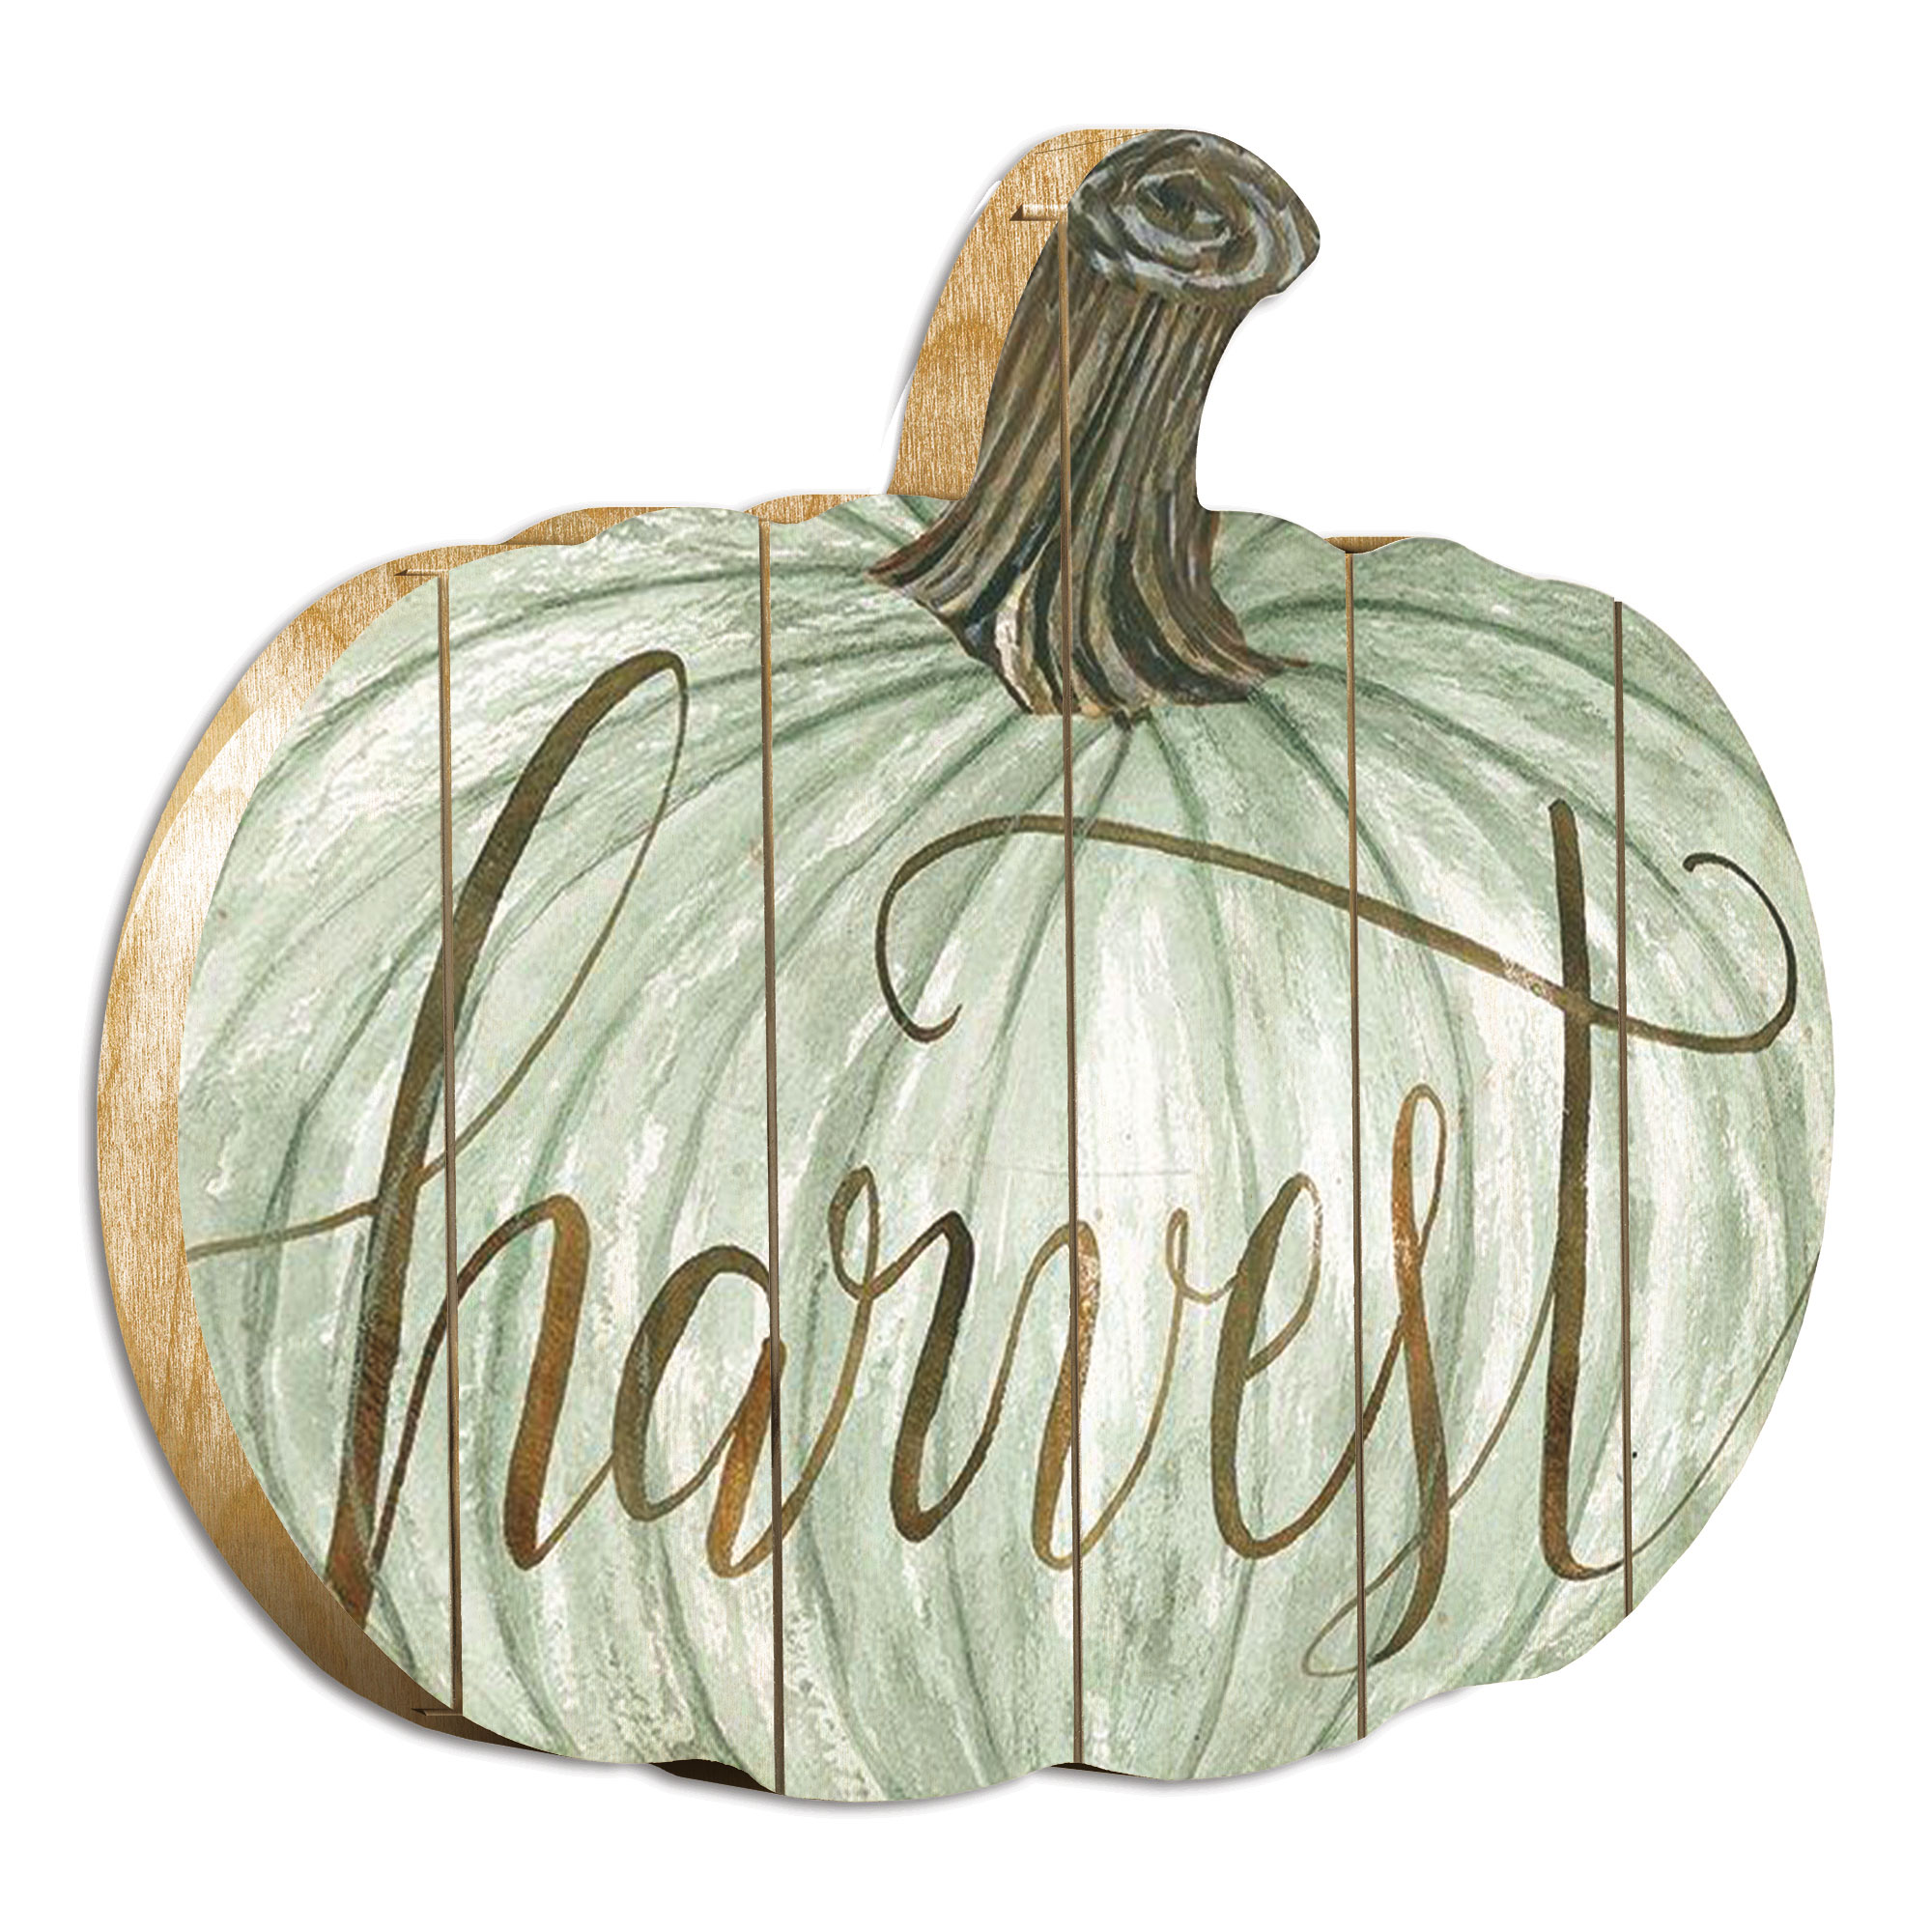 "Harvest" By Artisan Cindy Jacobs Printed on Wooden Pumpkin Wall Art